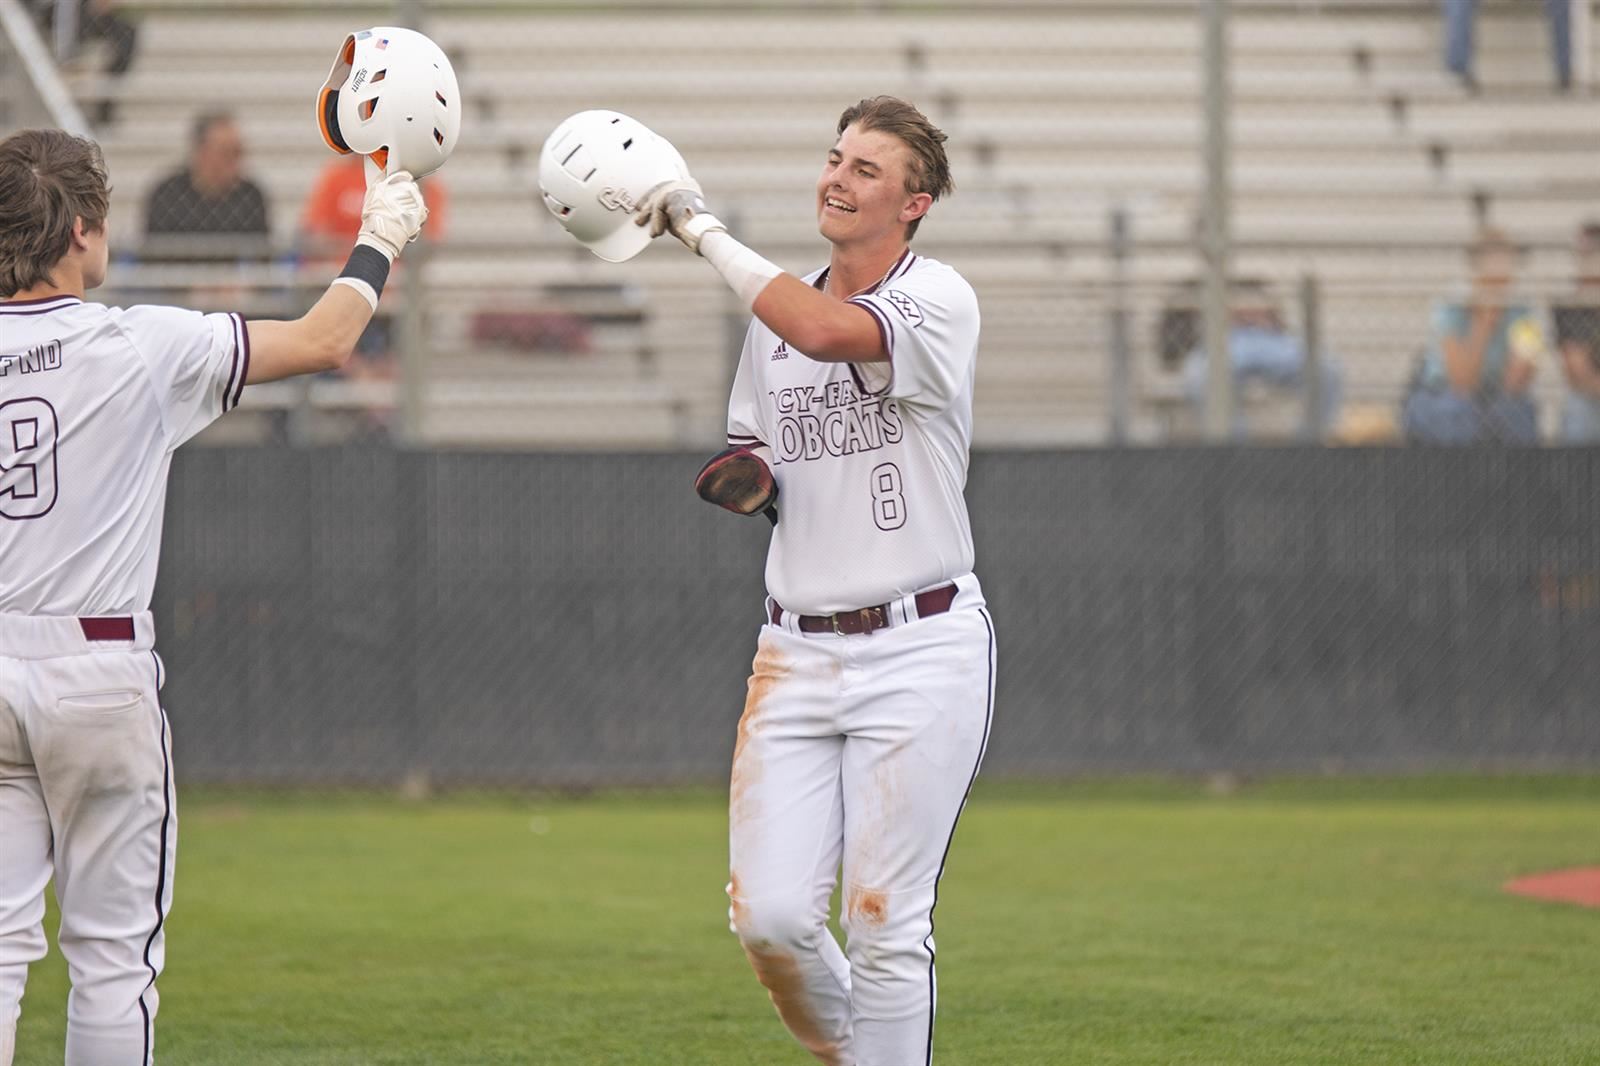 Cy-Fair High School sophomore Austin Godwin was voted the District 17-6A Newcomer of the Year by league coaches.